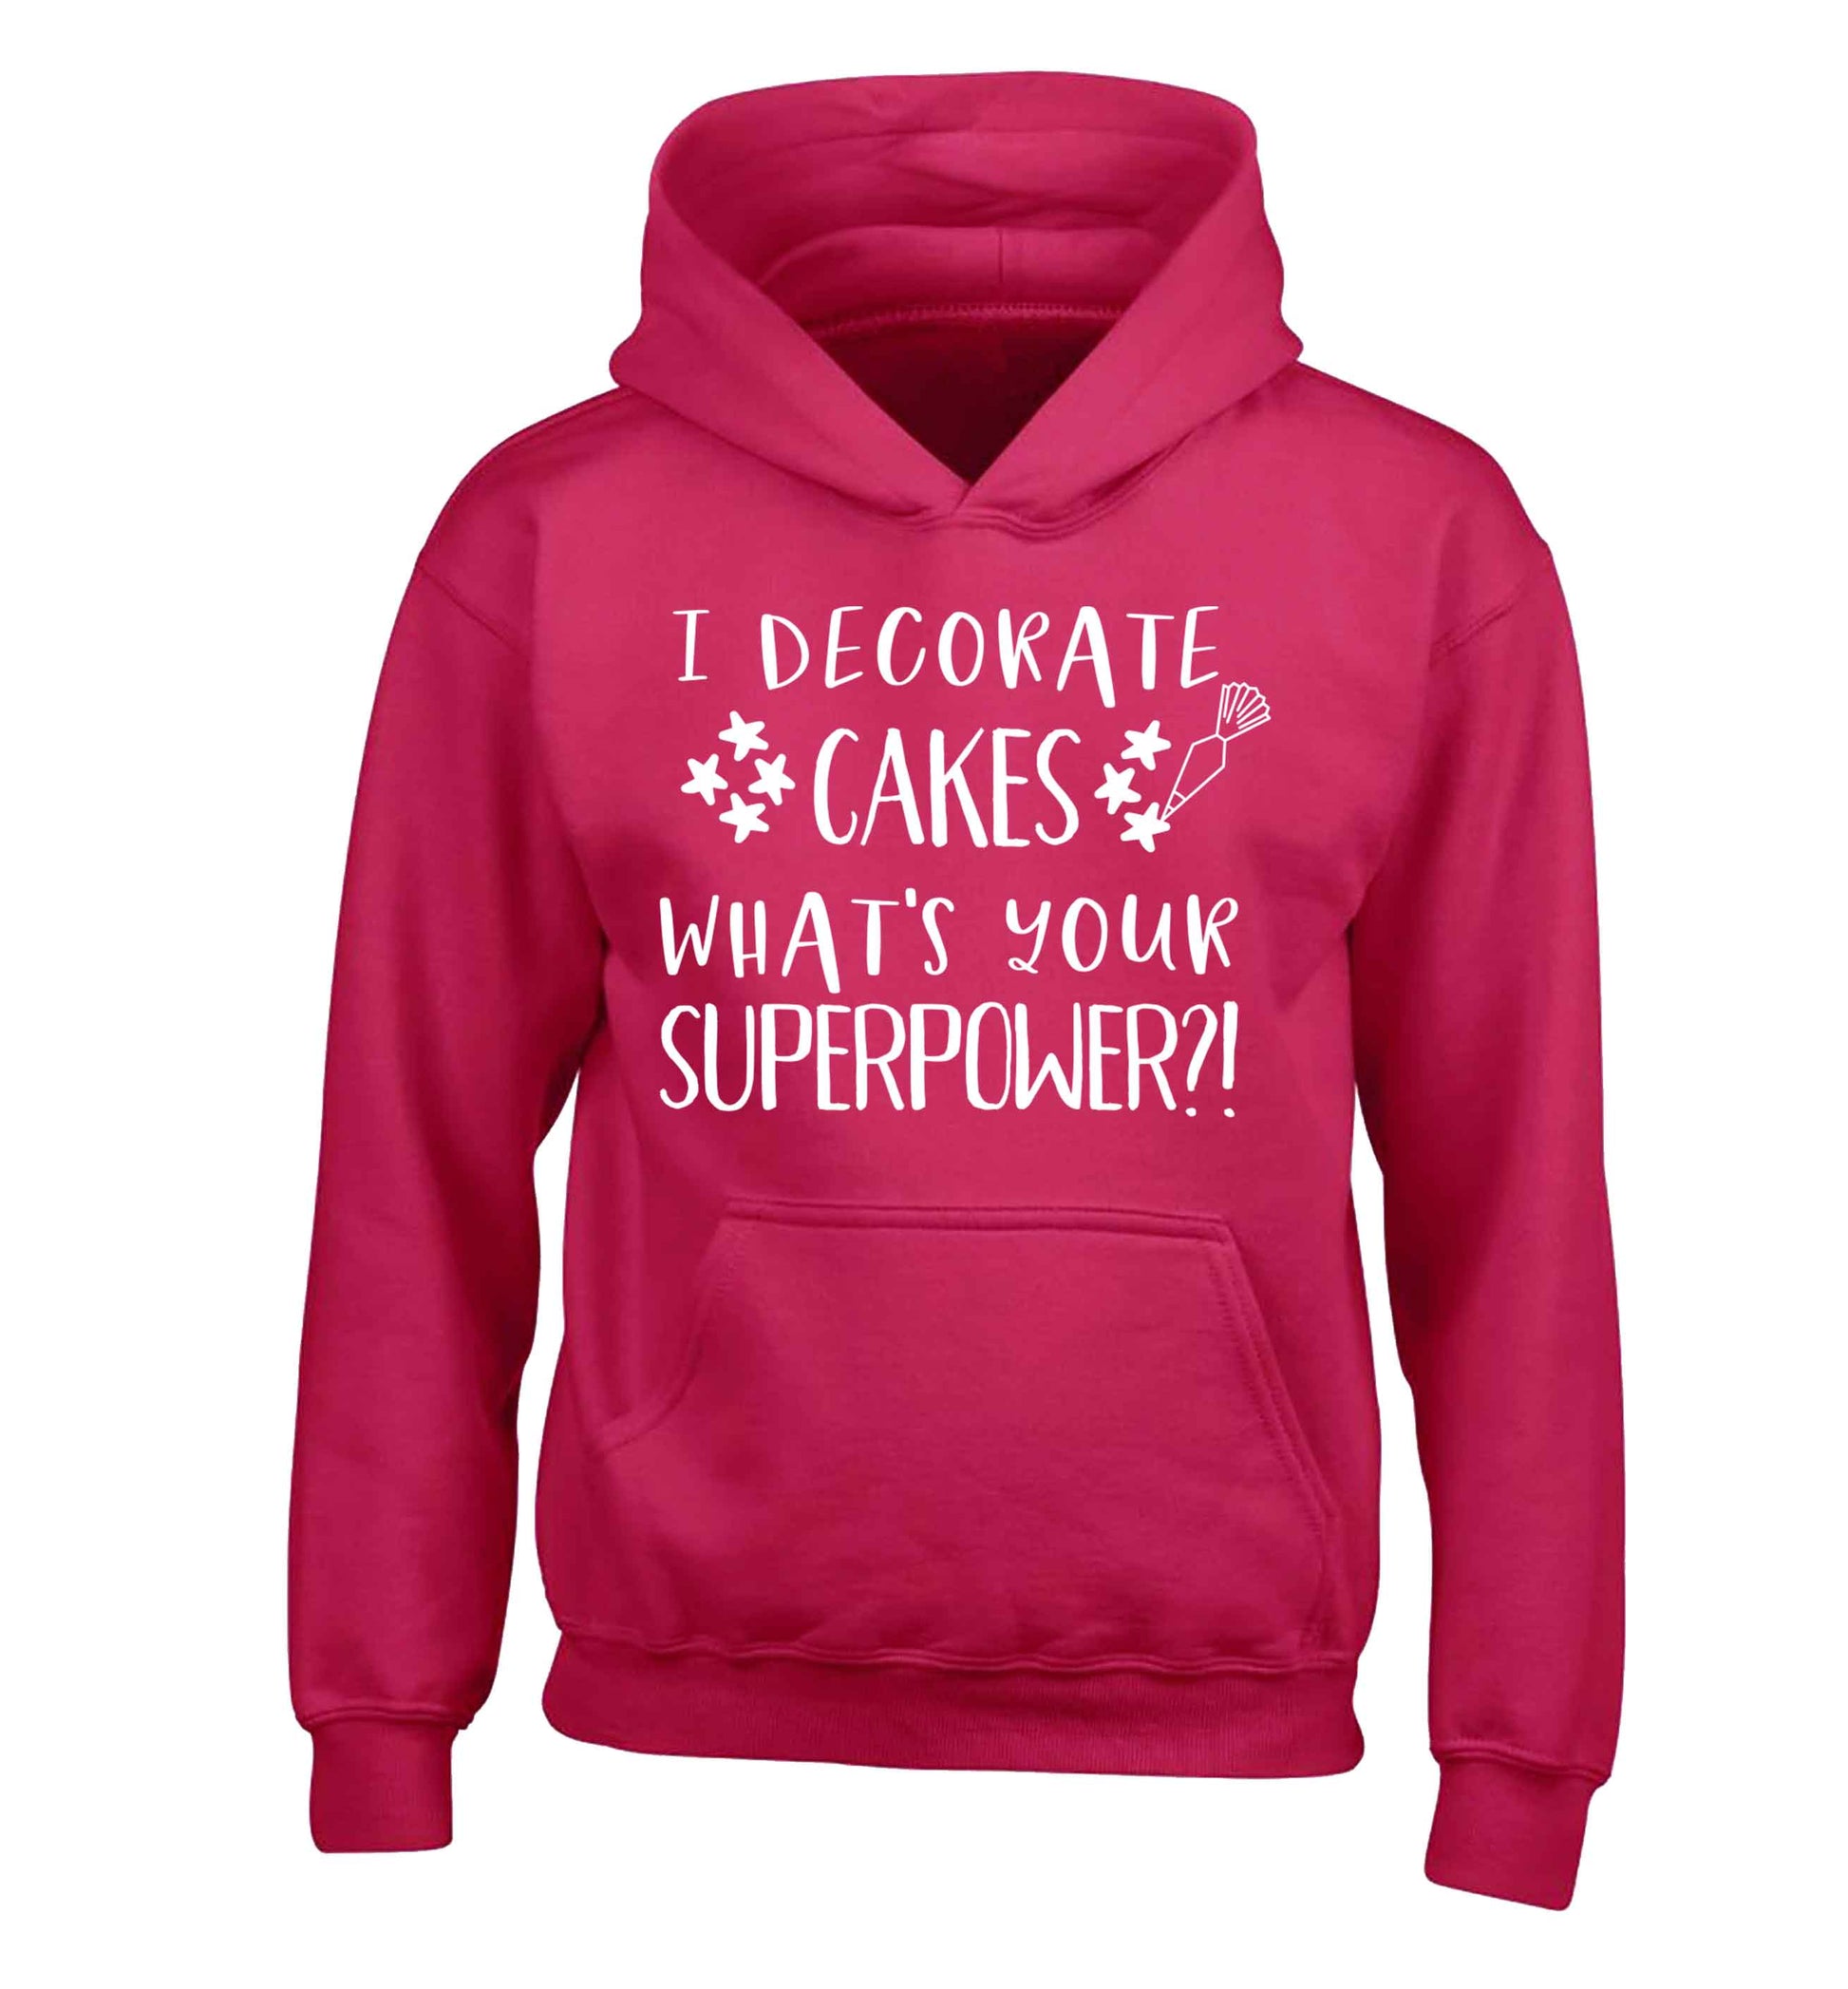 I decorate cakes what's your superpower?! children's pink hoodie 12-13 Years